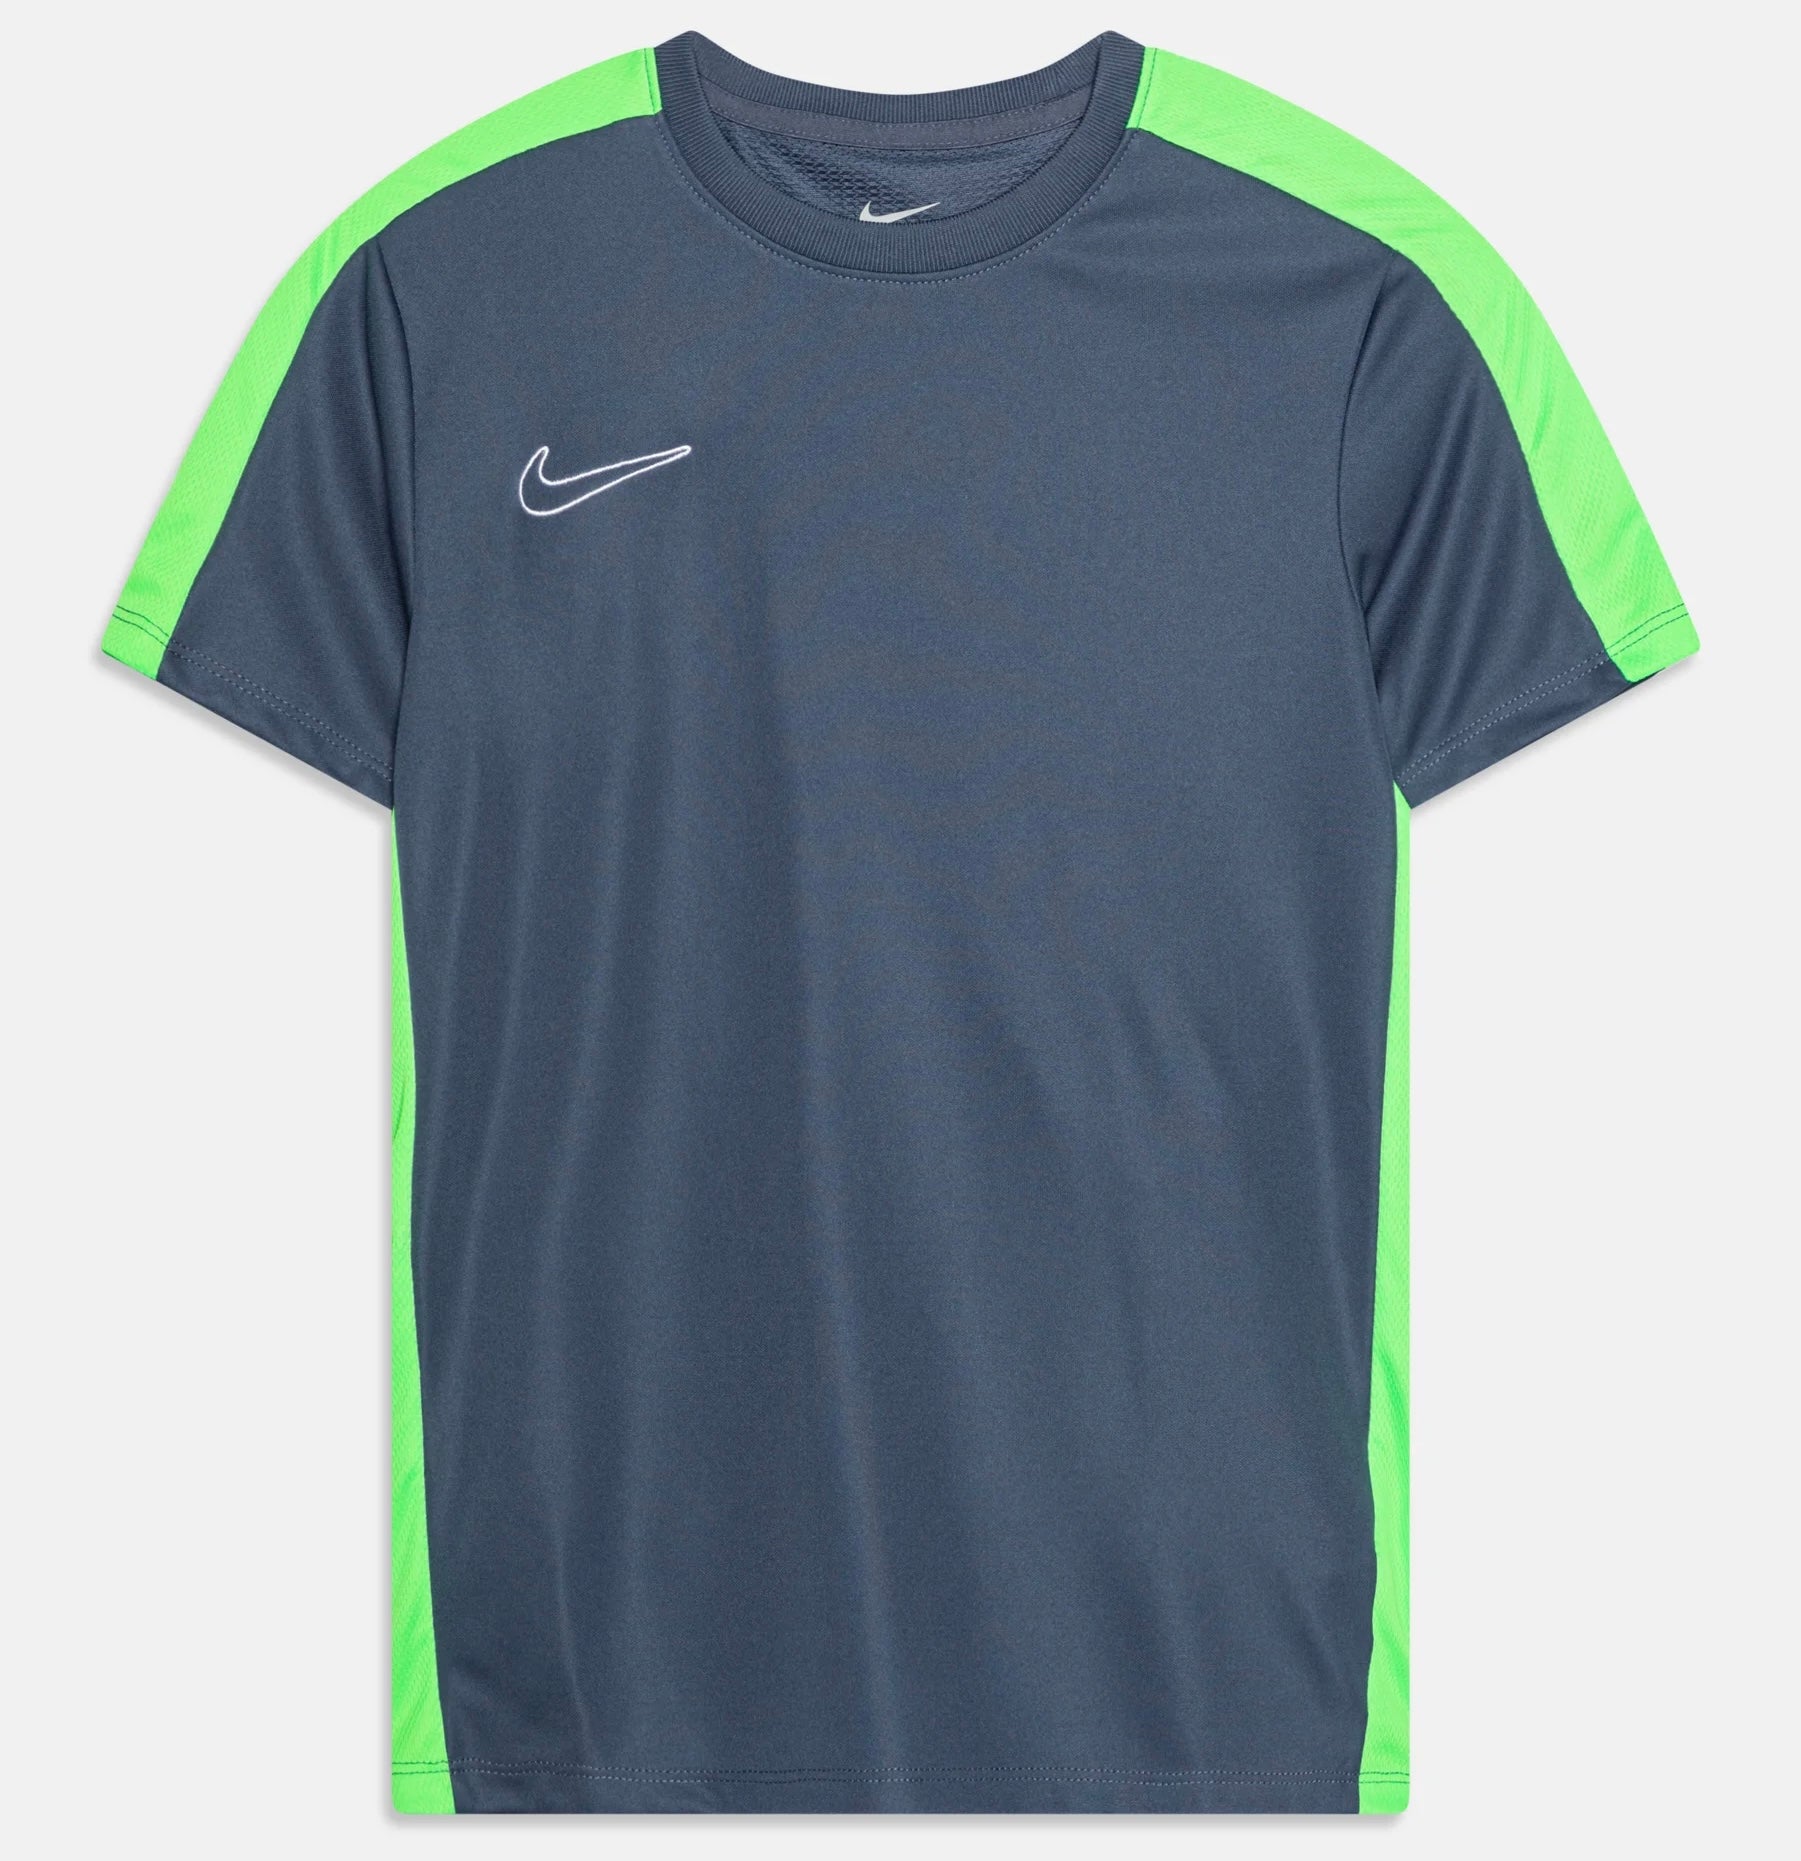 NIKE ACADEMY DRILL T-SHIRT - DIFFUSED BLUE